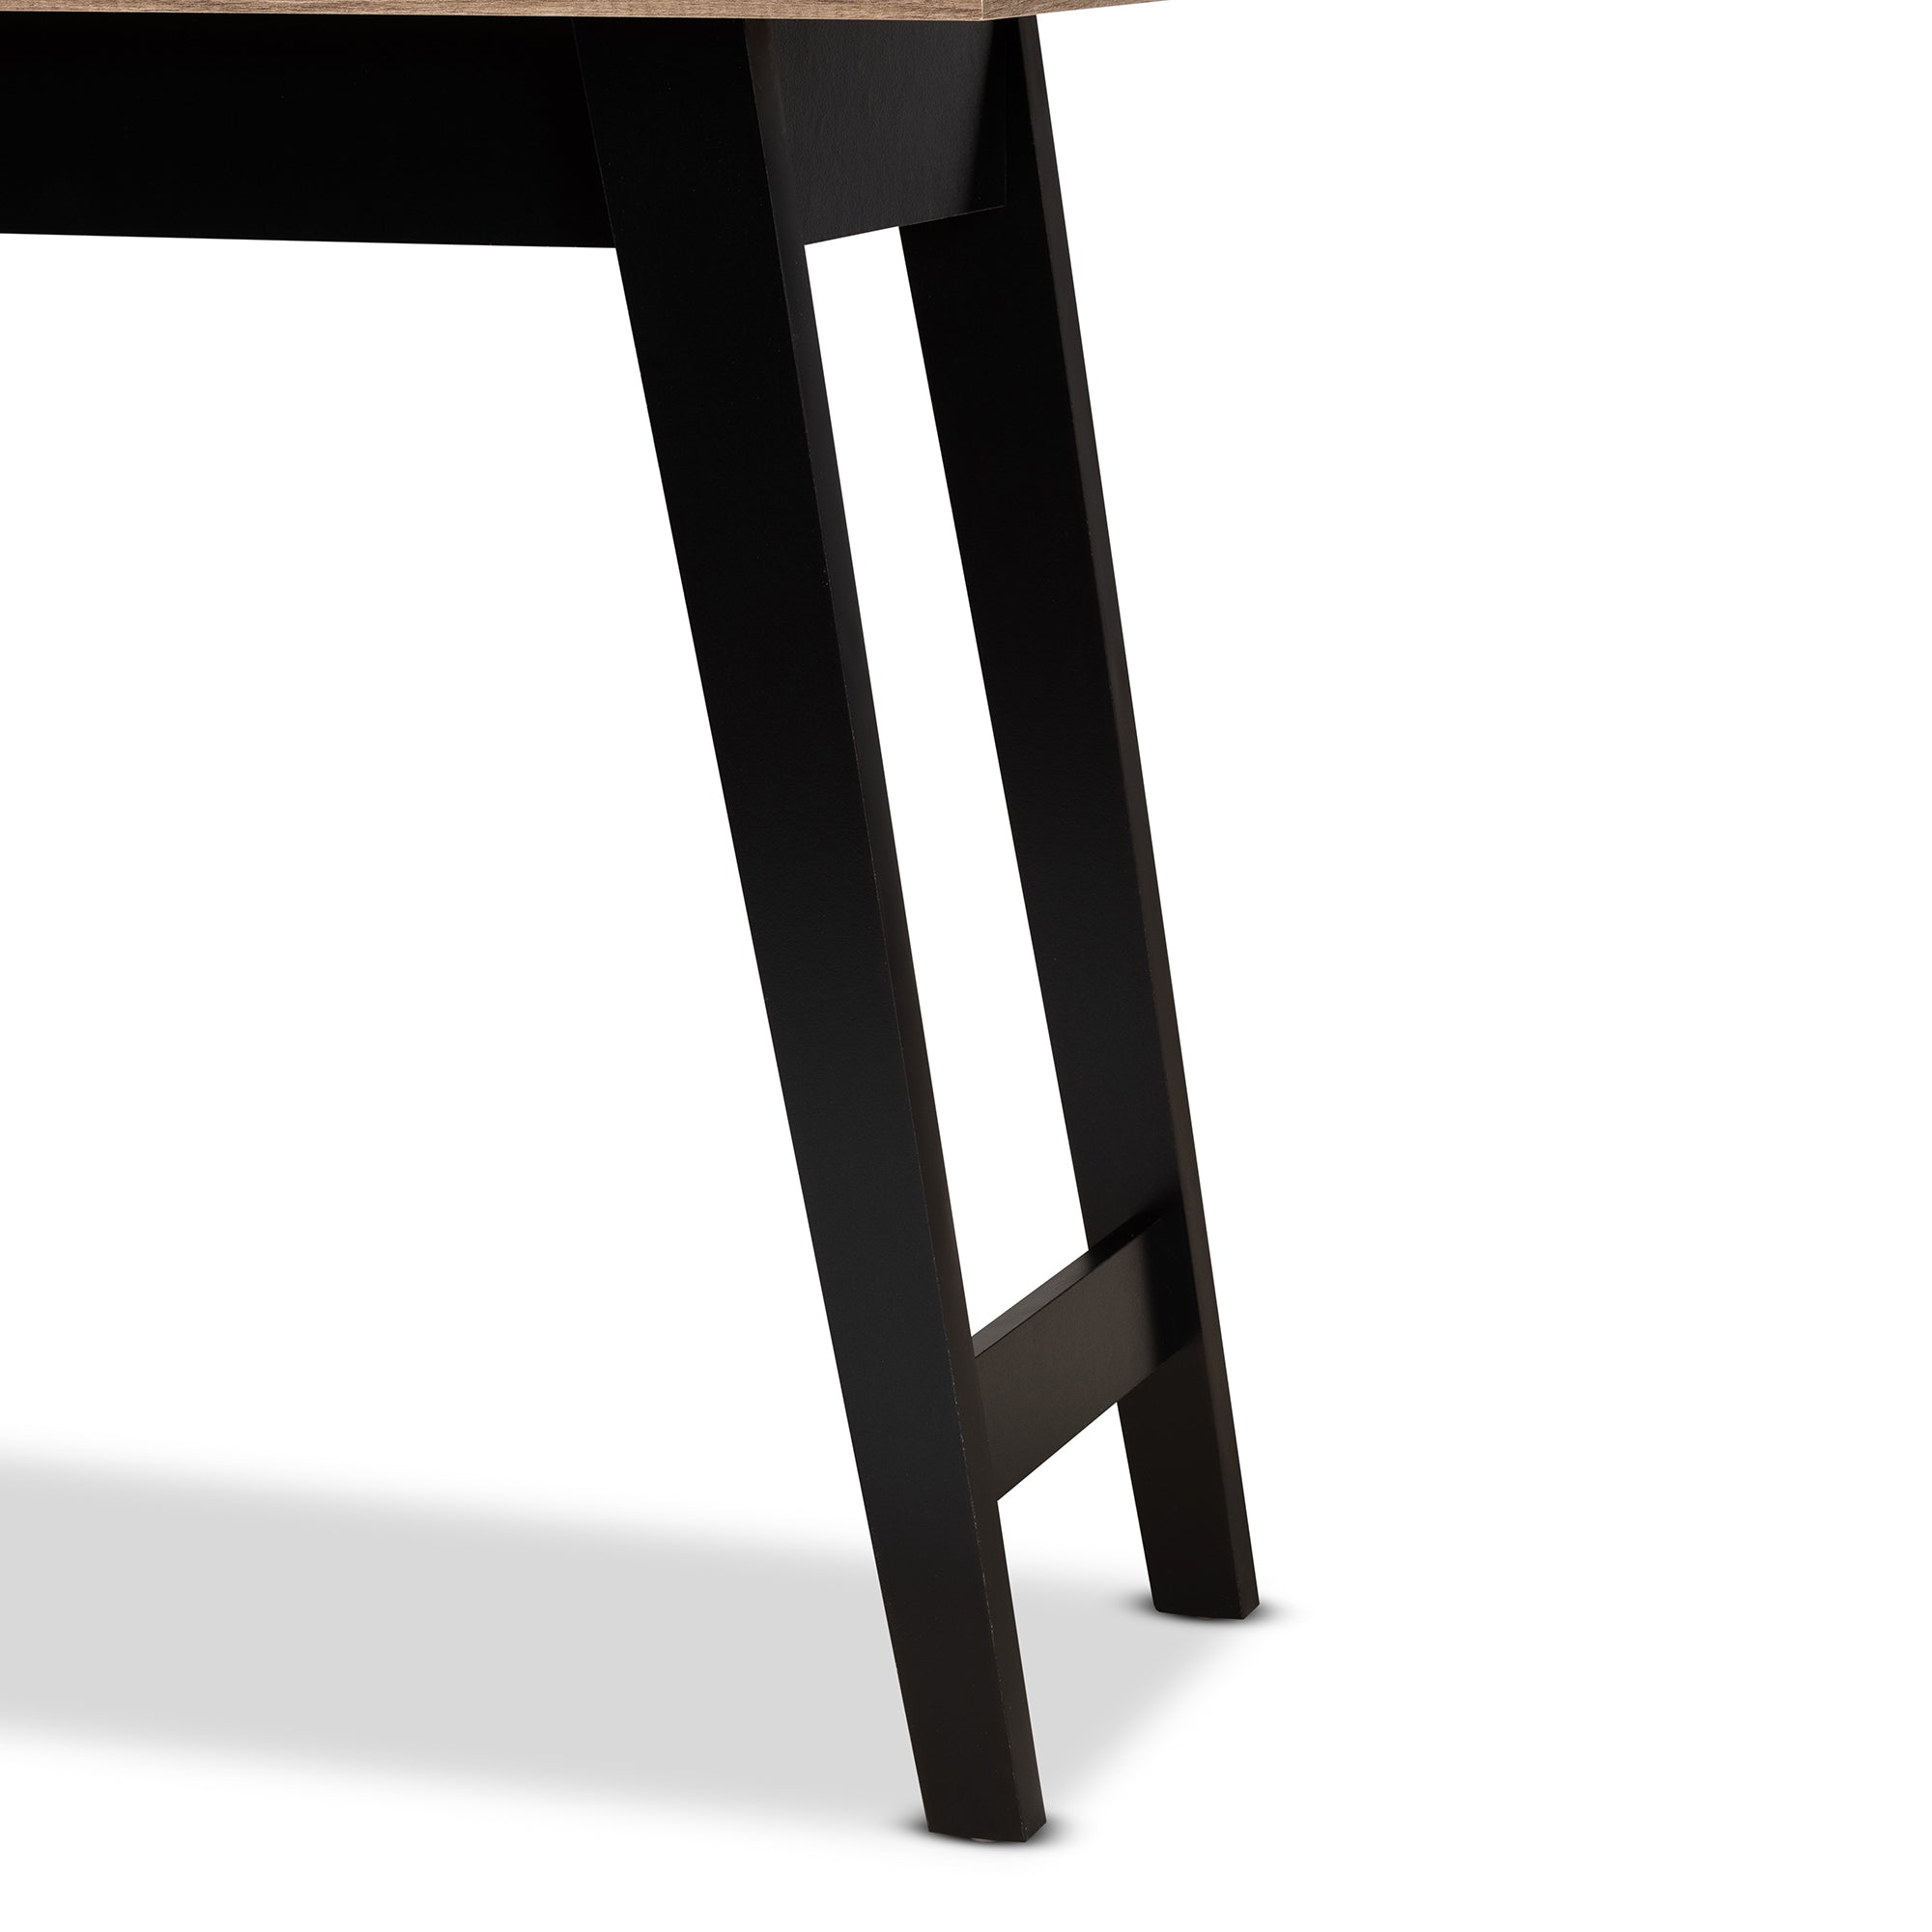 Wales Modern Console Table 2-Drawer-Console Table-Baxton Studio - WI-Wall2Wall Furnishings